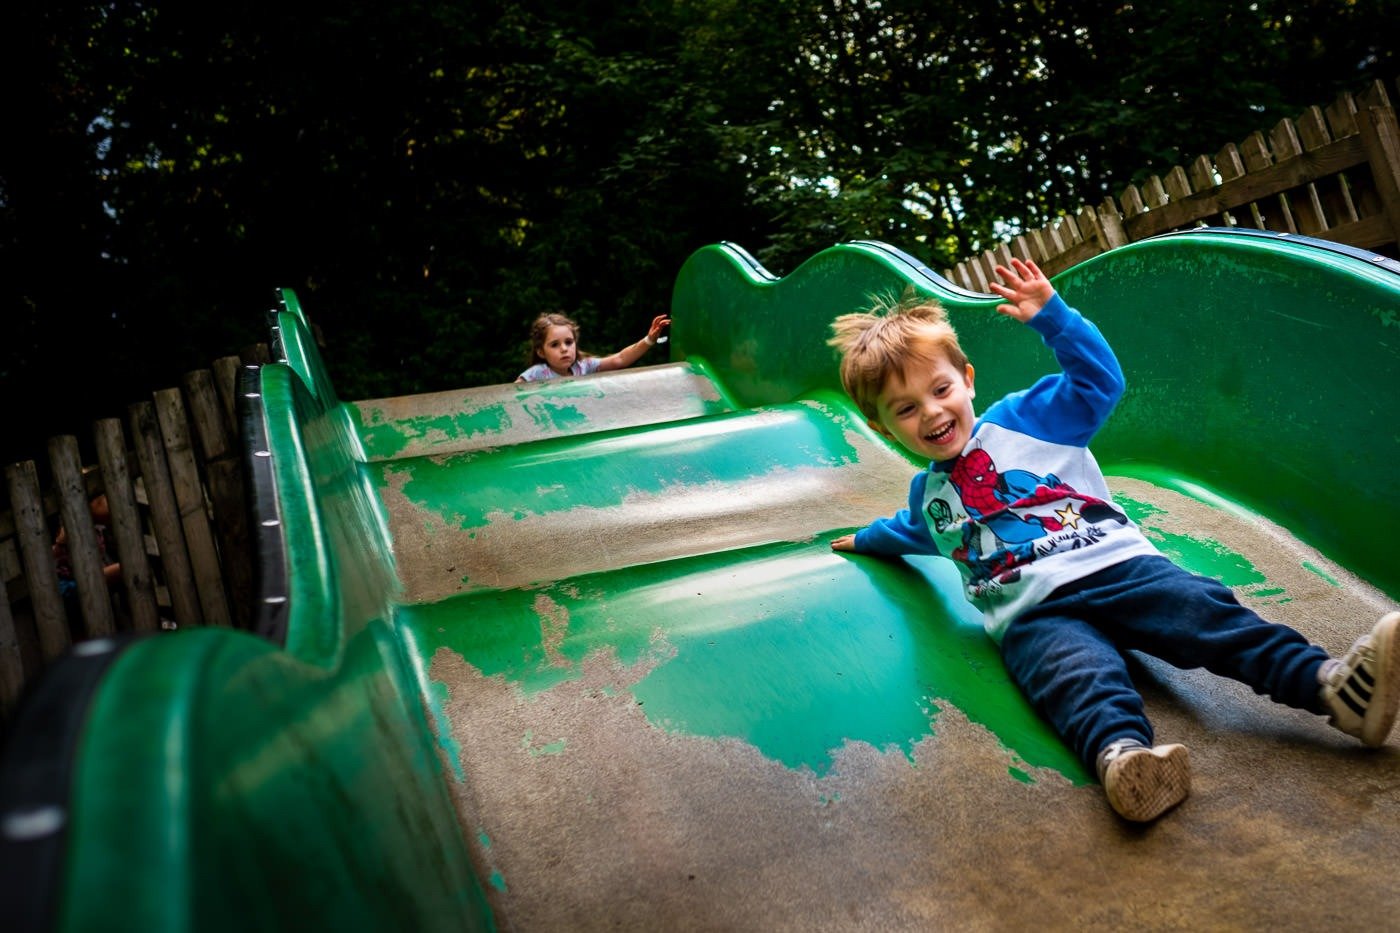 Child plays on a slide at Camp Bestival